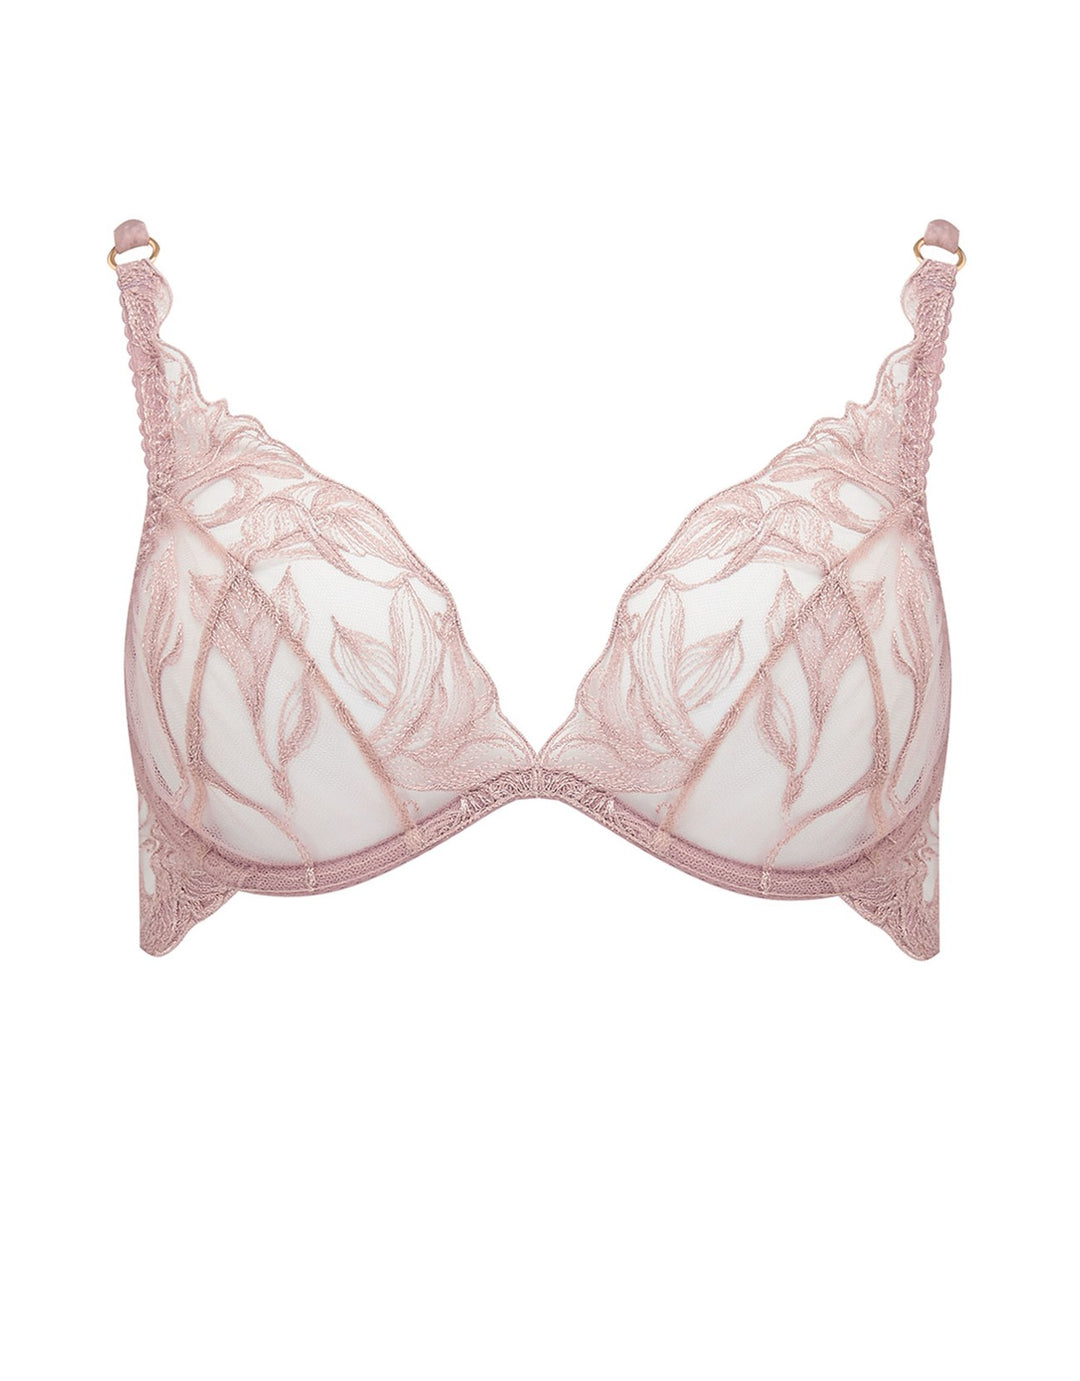 Fleur Fantasy 1/4 Cup Bra - For Her from The Luxe Company UK